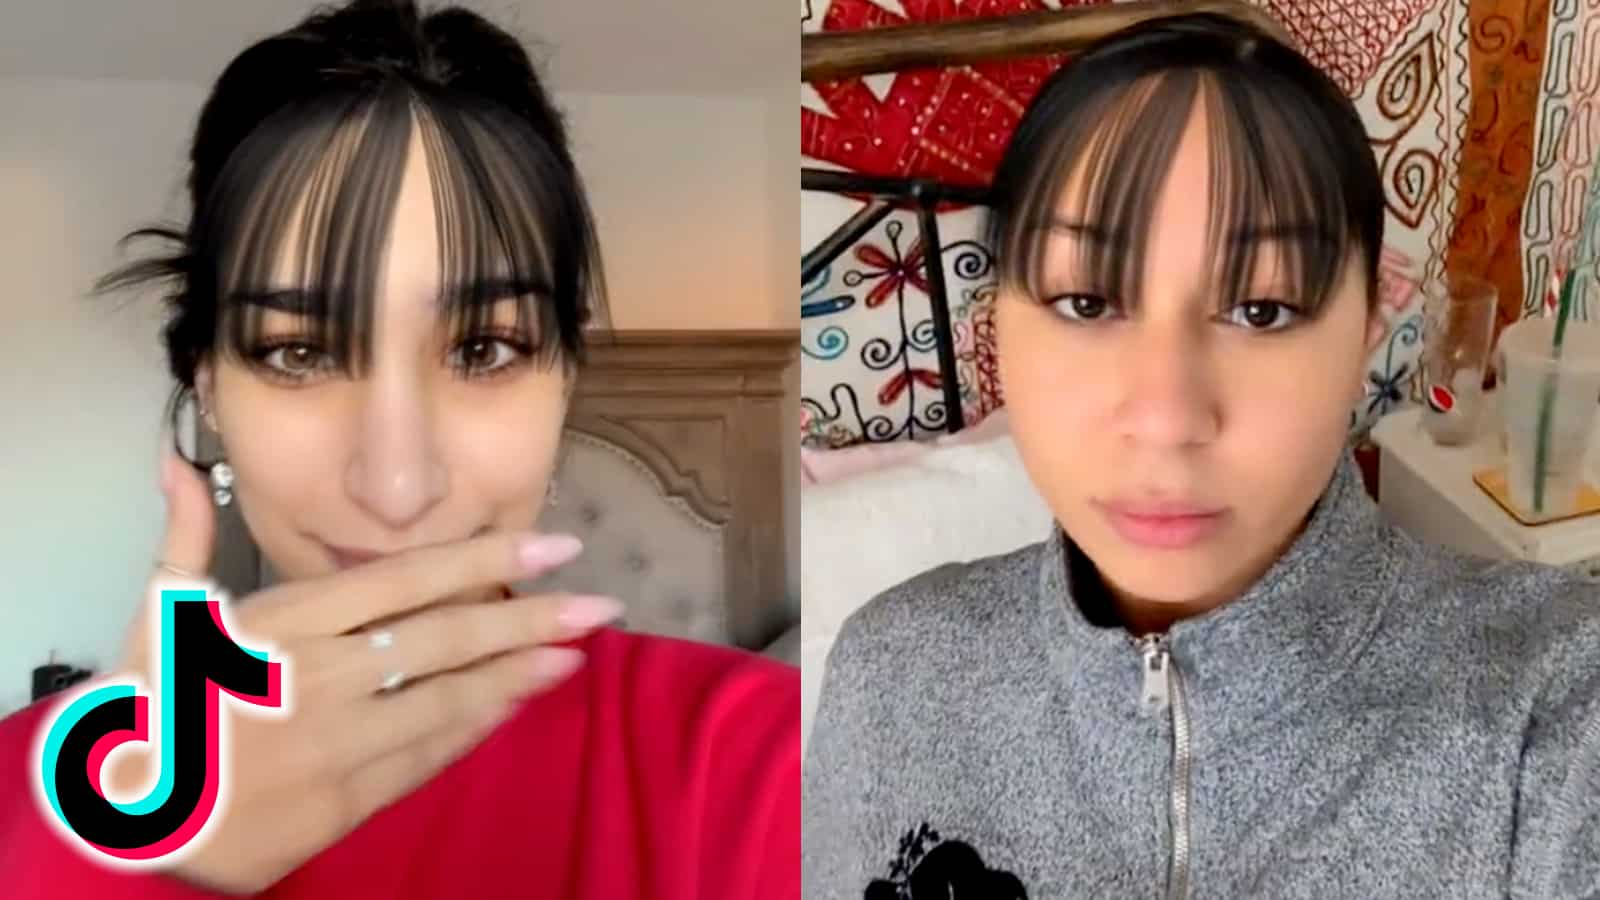 TikTok users try out bangs filter